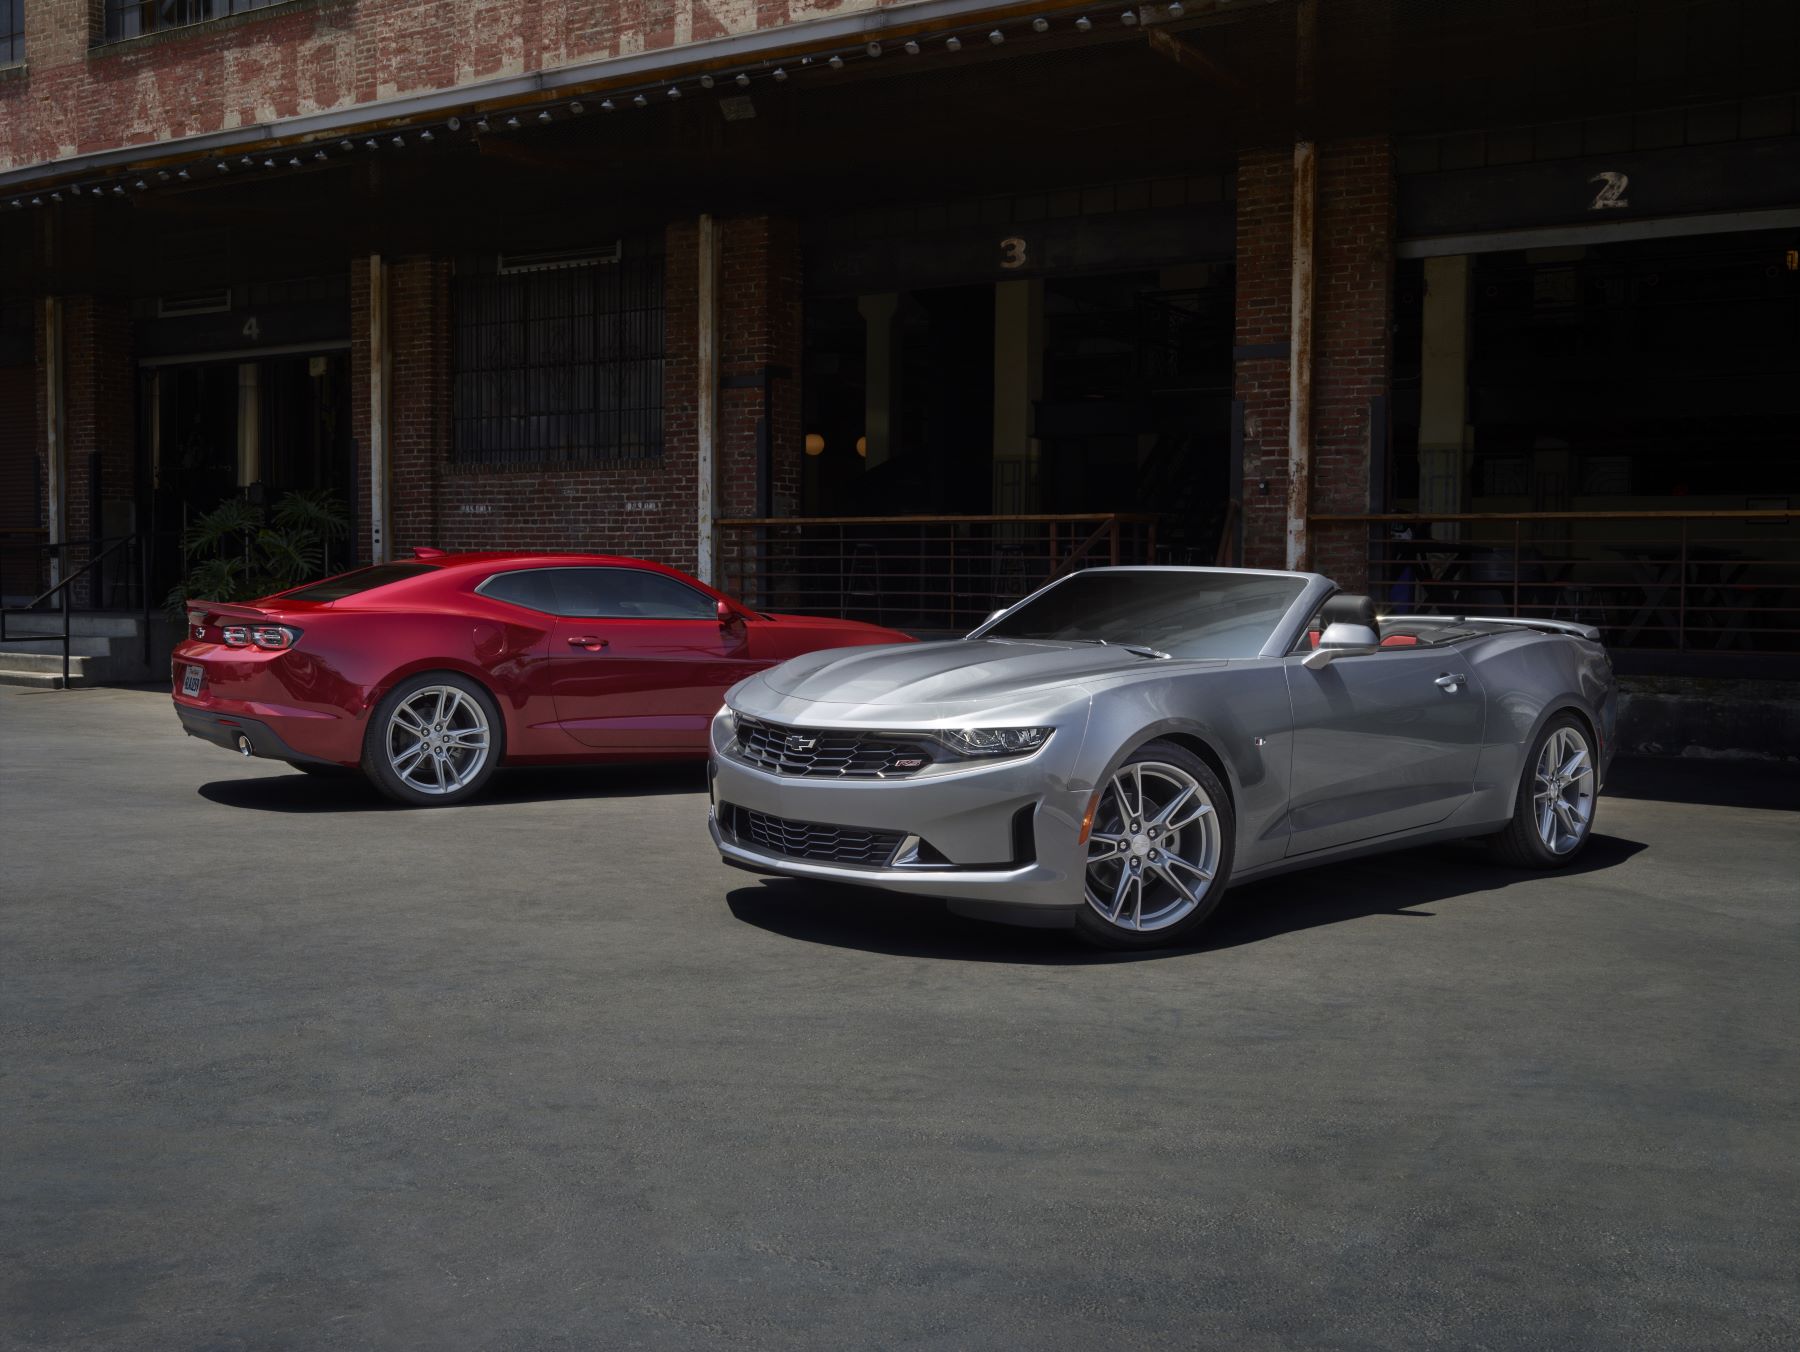 2021 Chevrolet Camaro LS and LT muscle car models in red and silver parked outside of a brick building